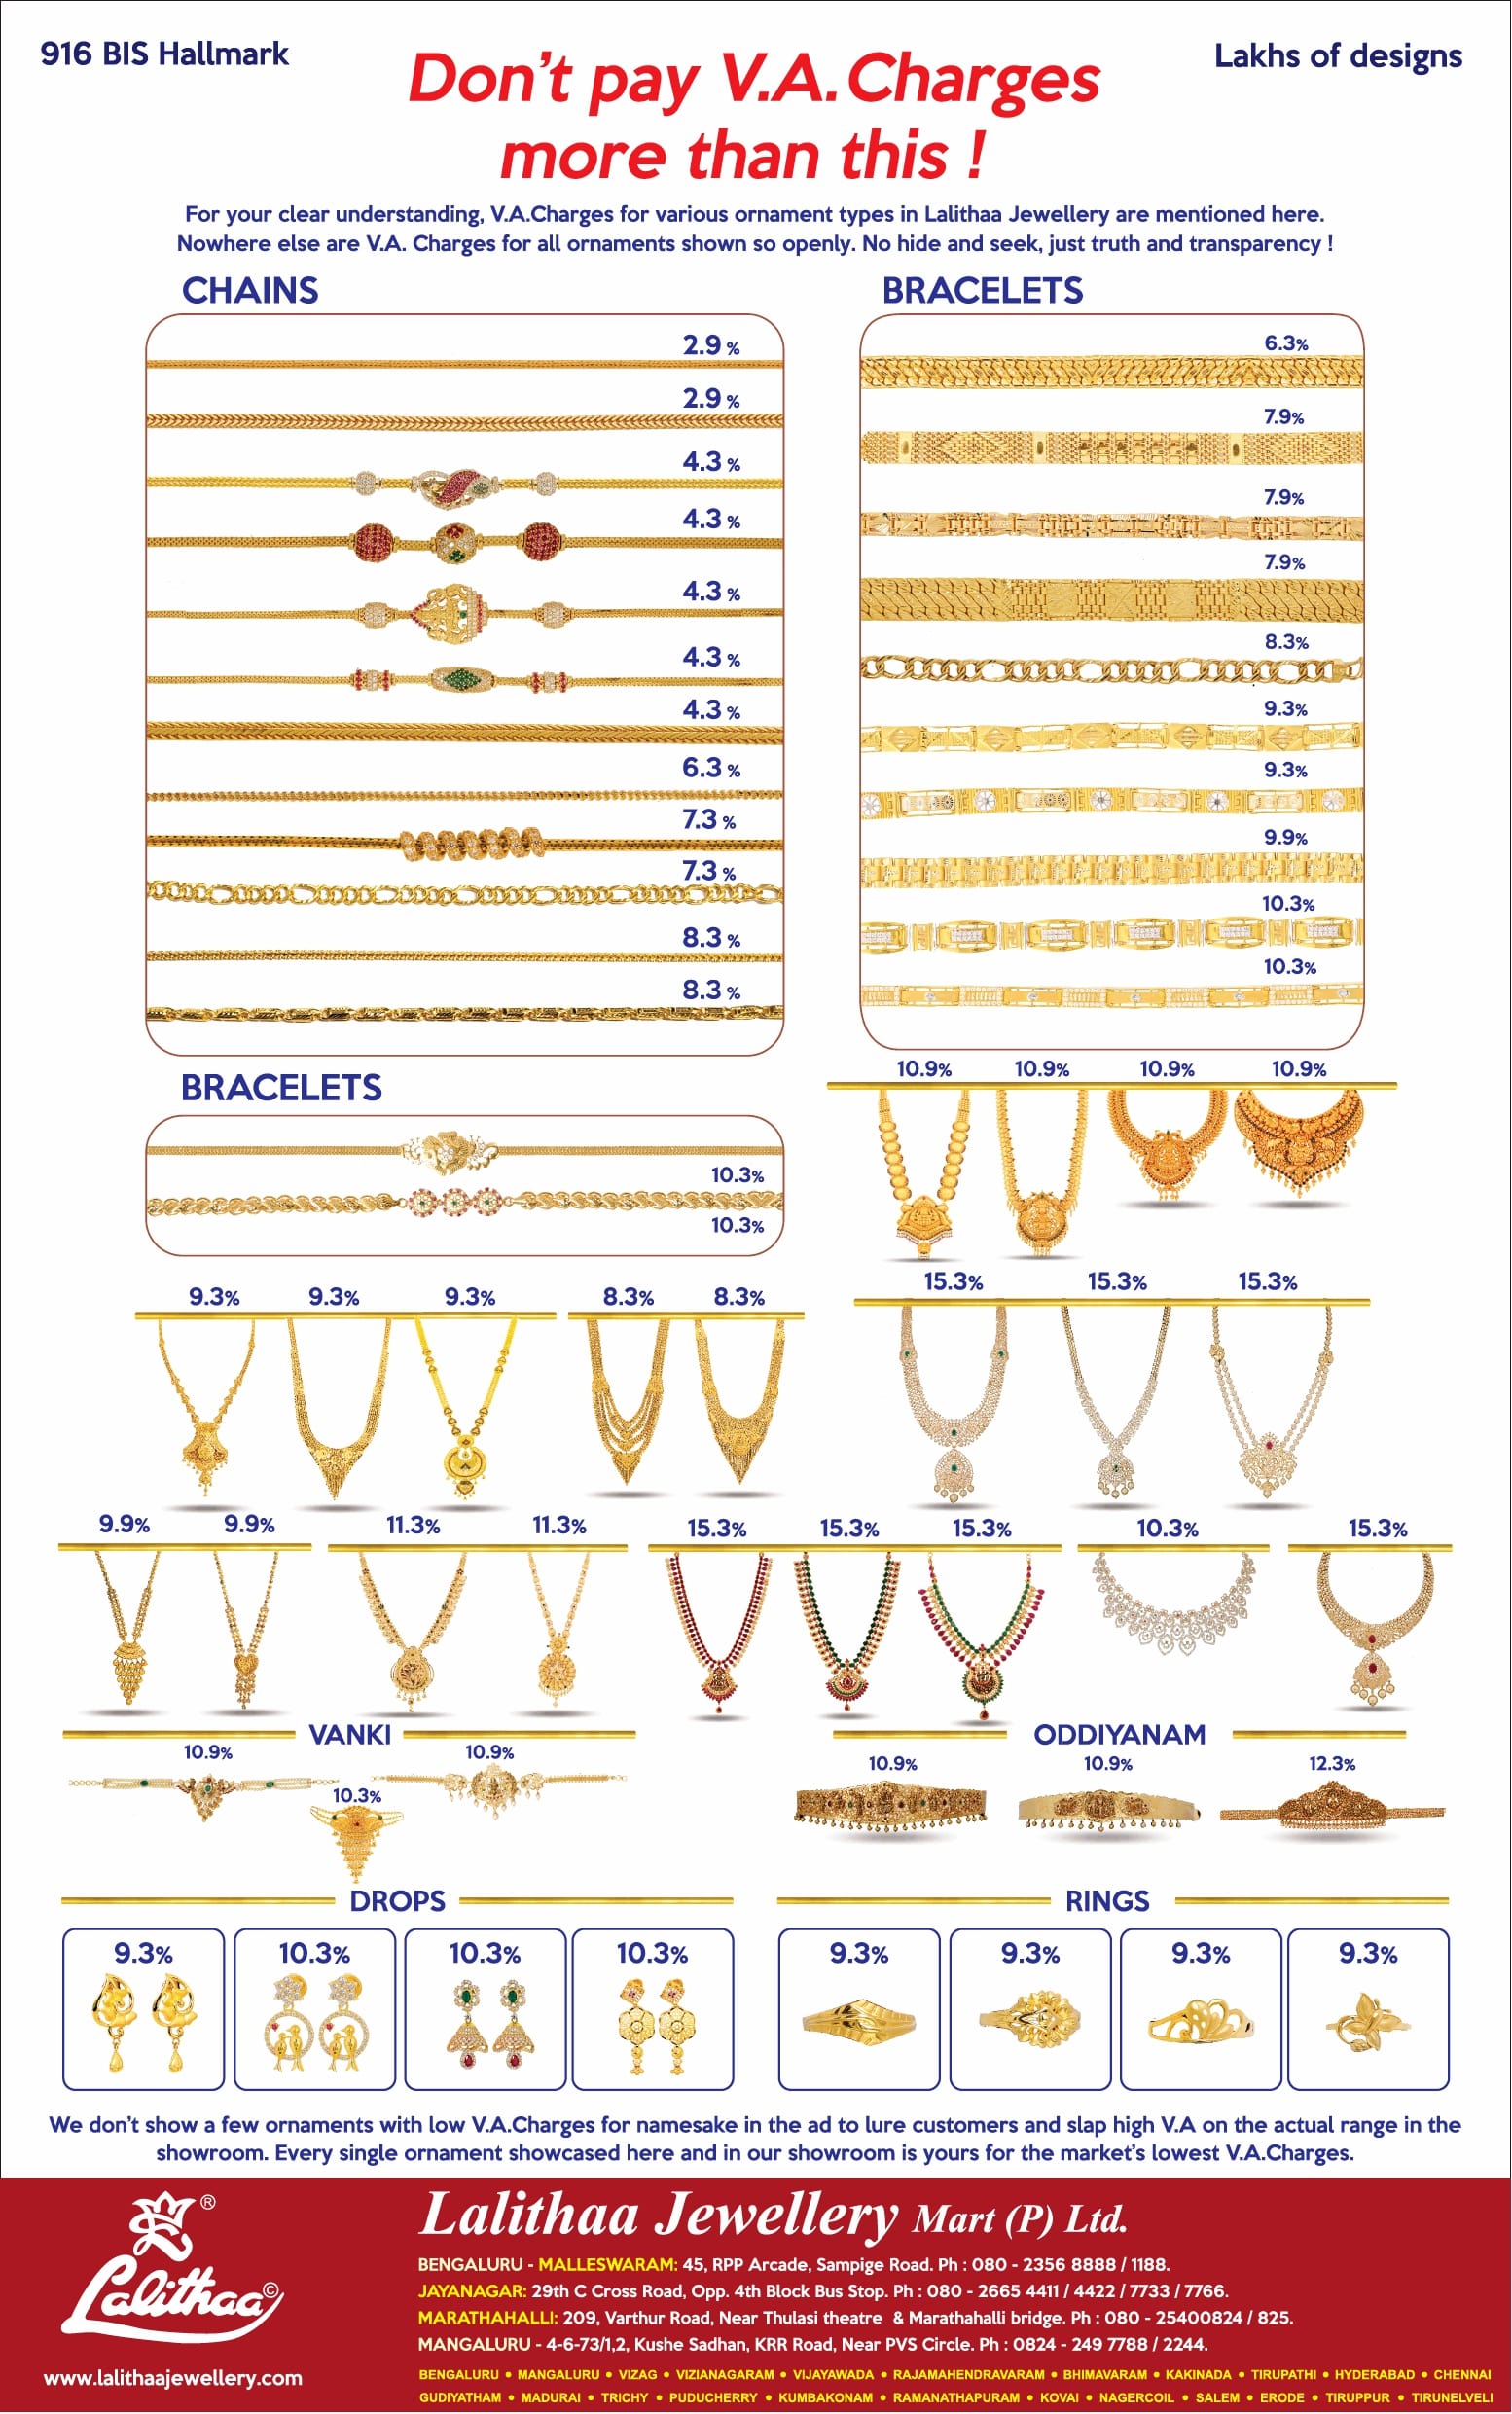 lalitha-jewellery-mart-p-ltd-do-not-pay-v-a-charges-more-than-this-ad-times-of-india-bangalore-24-12-2020